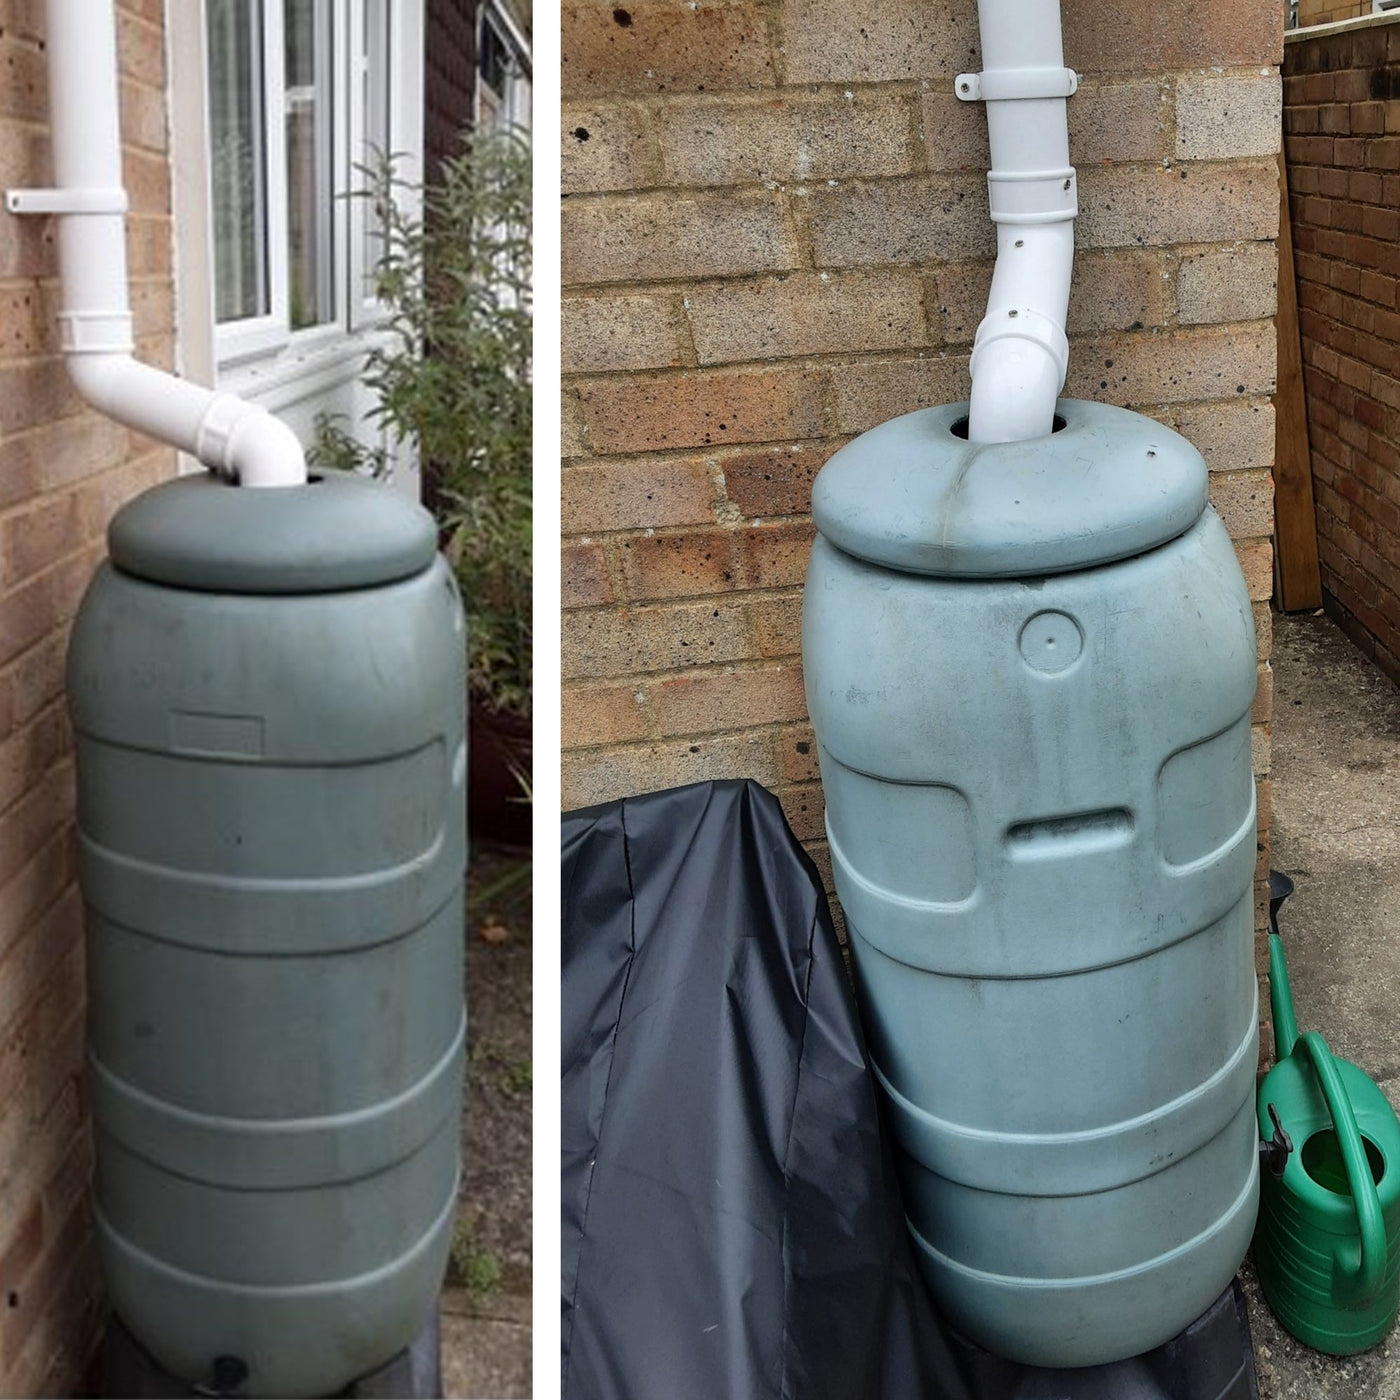 Water butt bypass kit (to be purchased with a Rainwater Terrace)